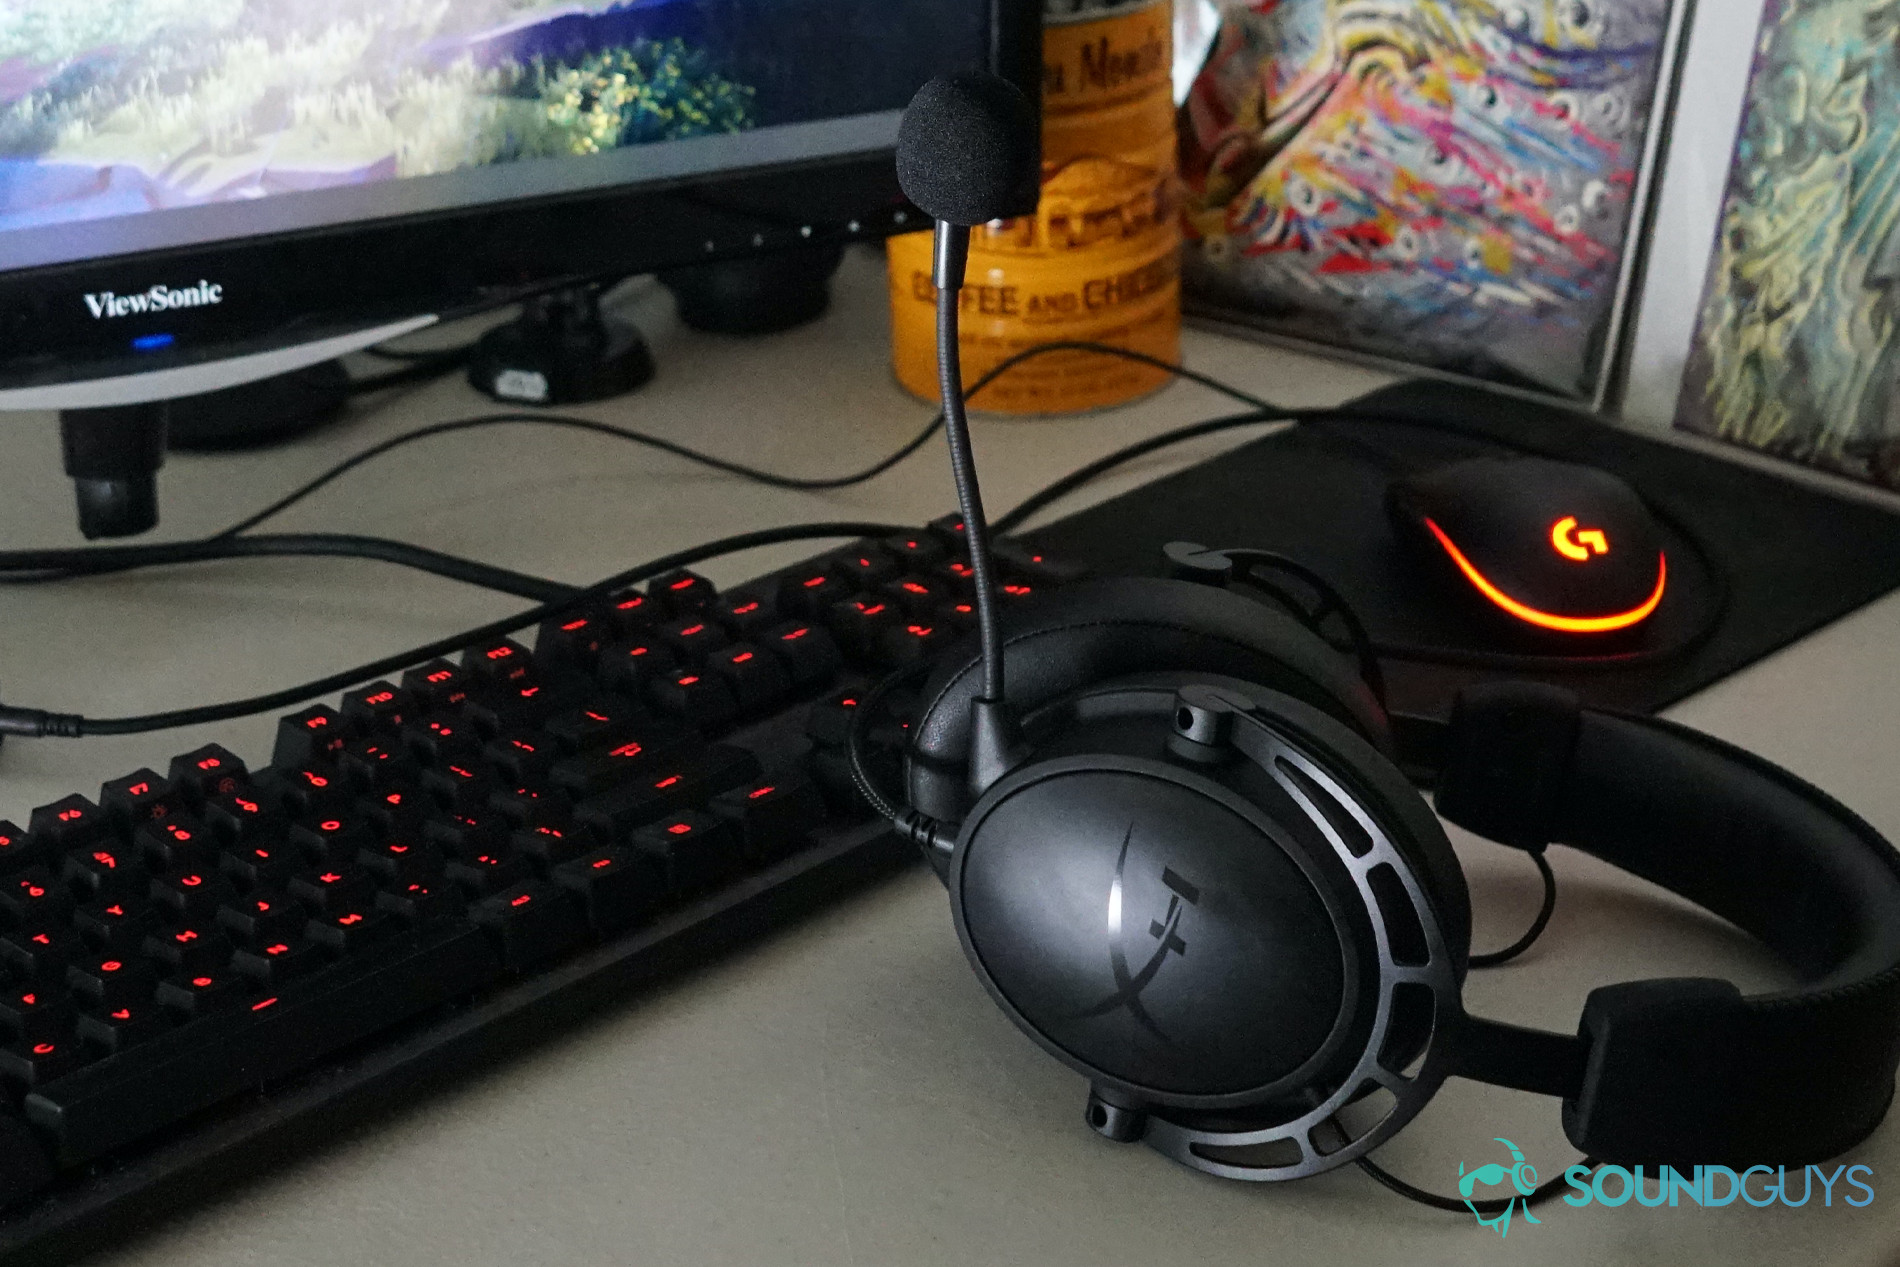 A picture of the HyperX Cloud Alpha S sits in front of a gaming PC, in front of a Logitech mouse and gaming keyboard, with tin for Cafe Du Monde coffee and a painting of the Flash in the background.